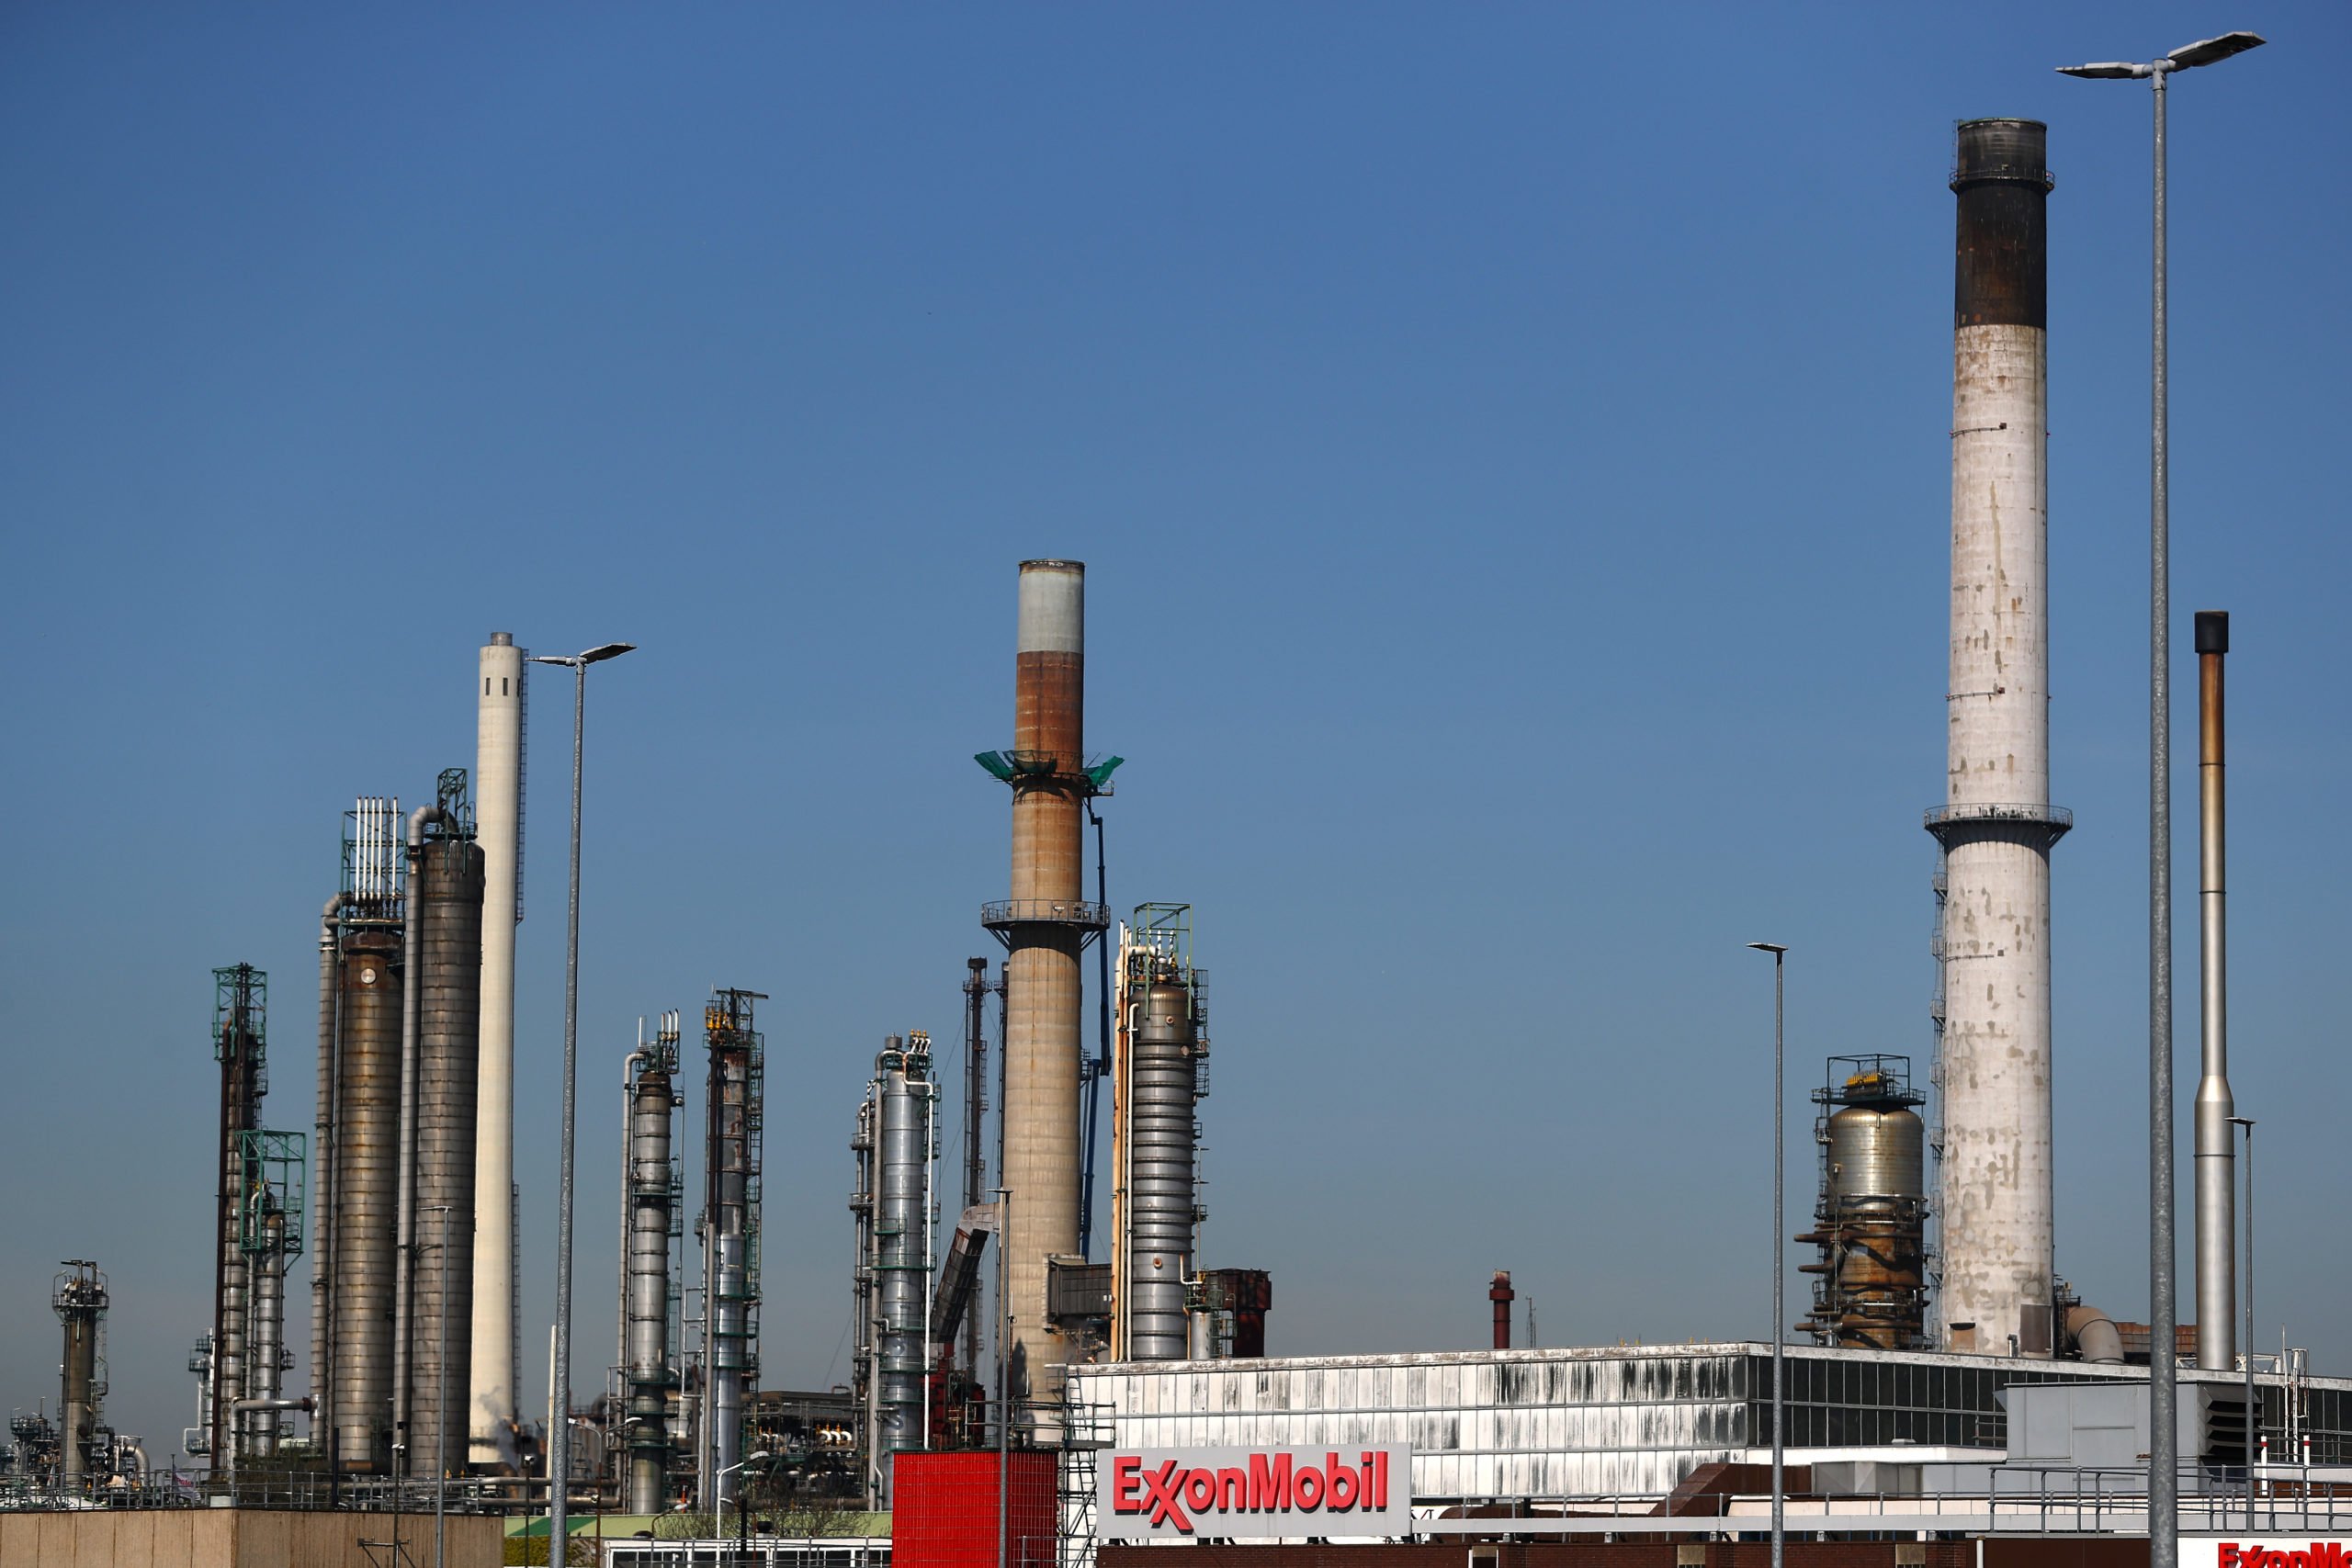 A general view of an Exxon Mobil refinery on April 23, 2020 in Rotterdam, Netherlands. (Dean Mouhtaropoulos/Getty Images)